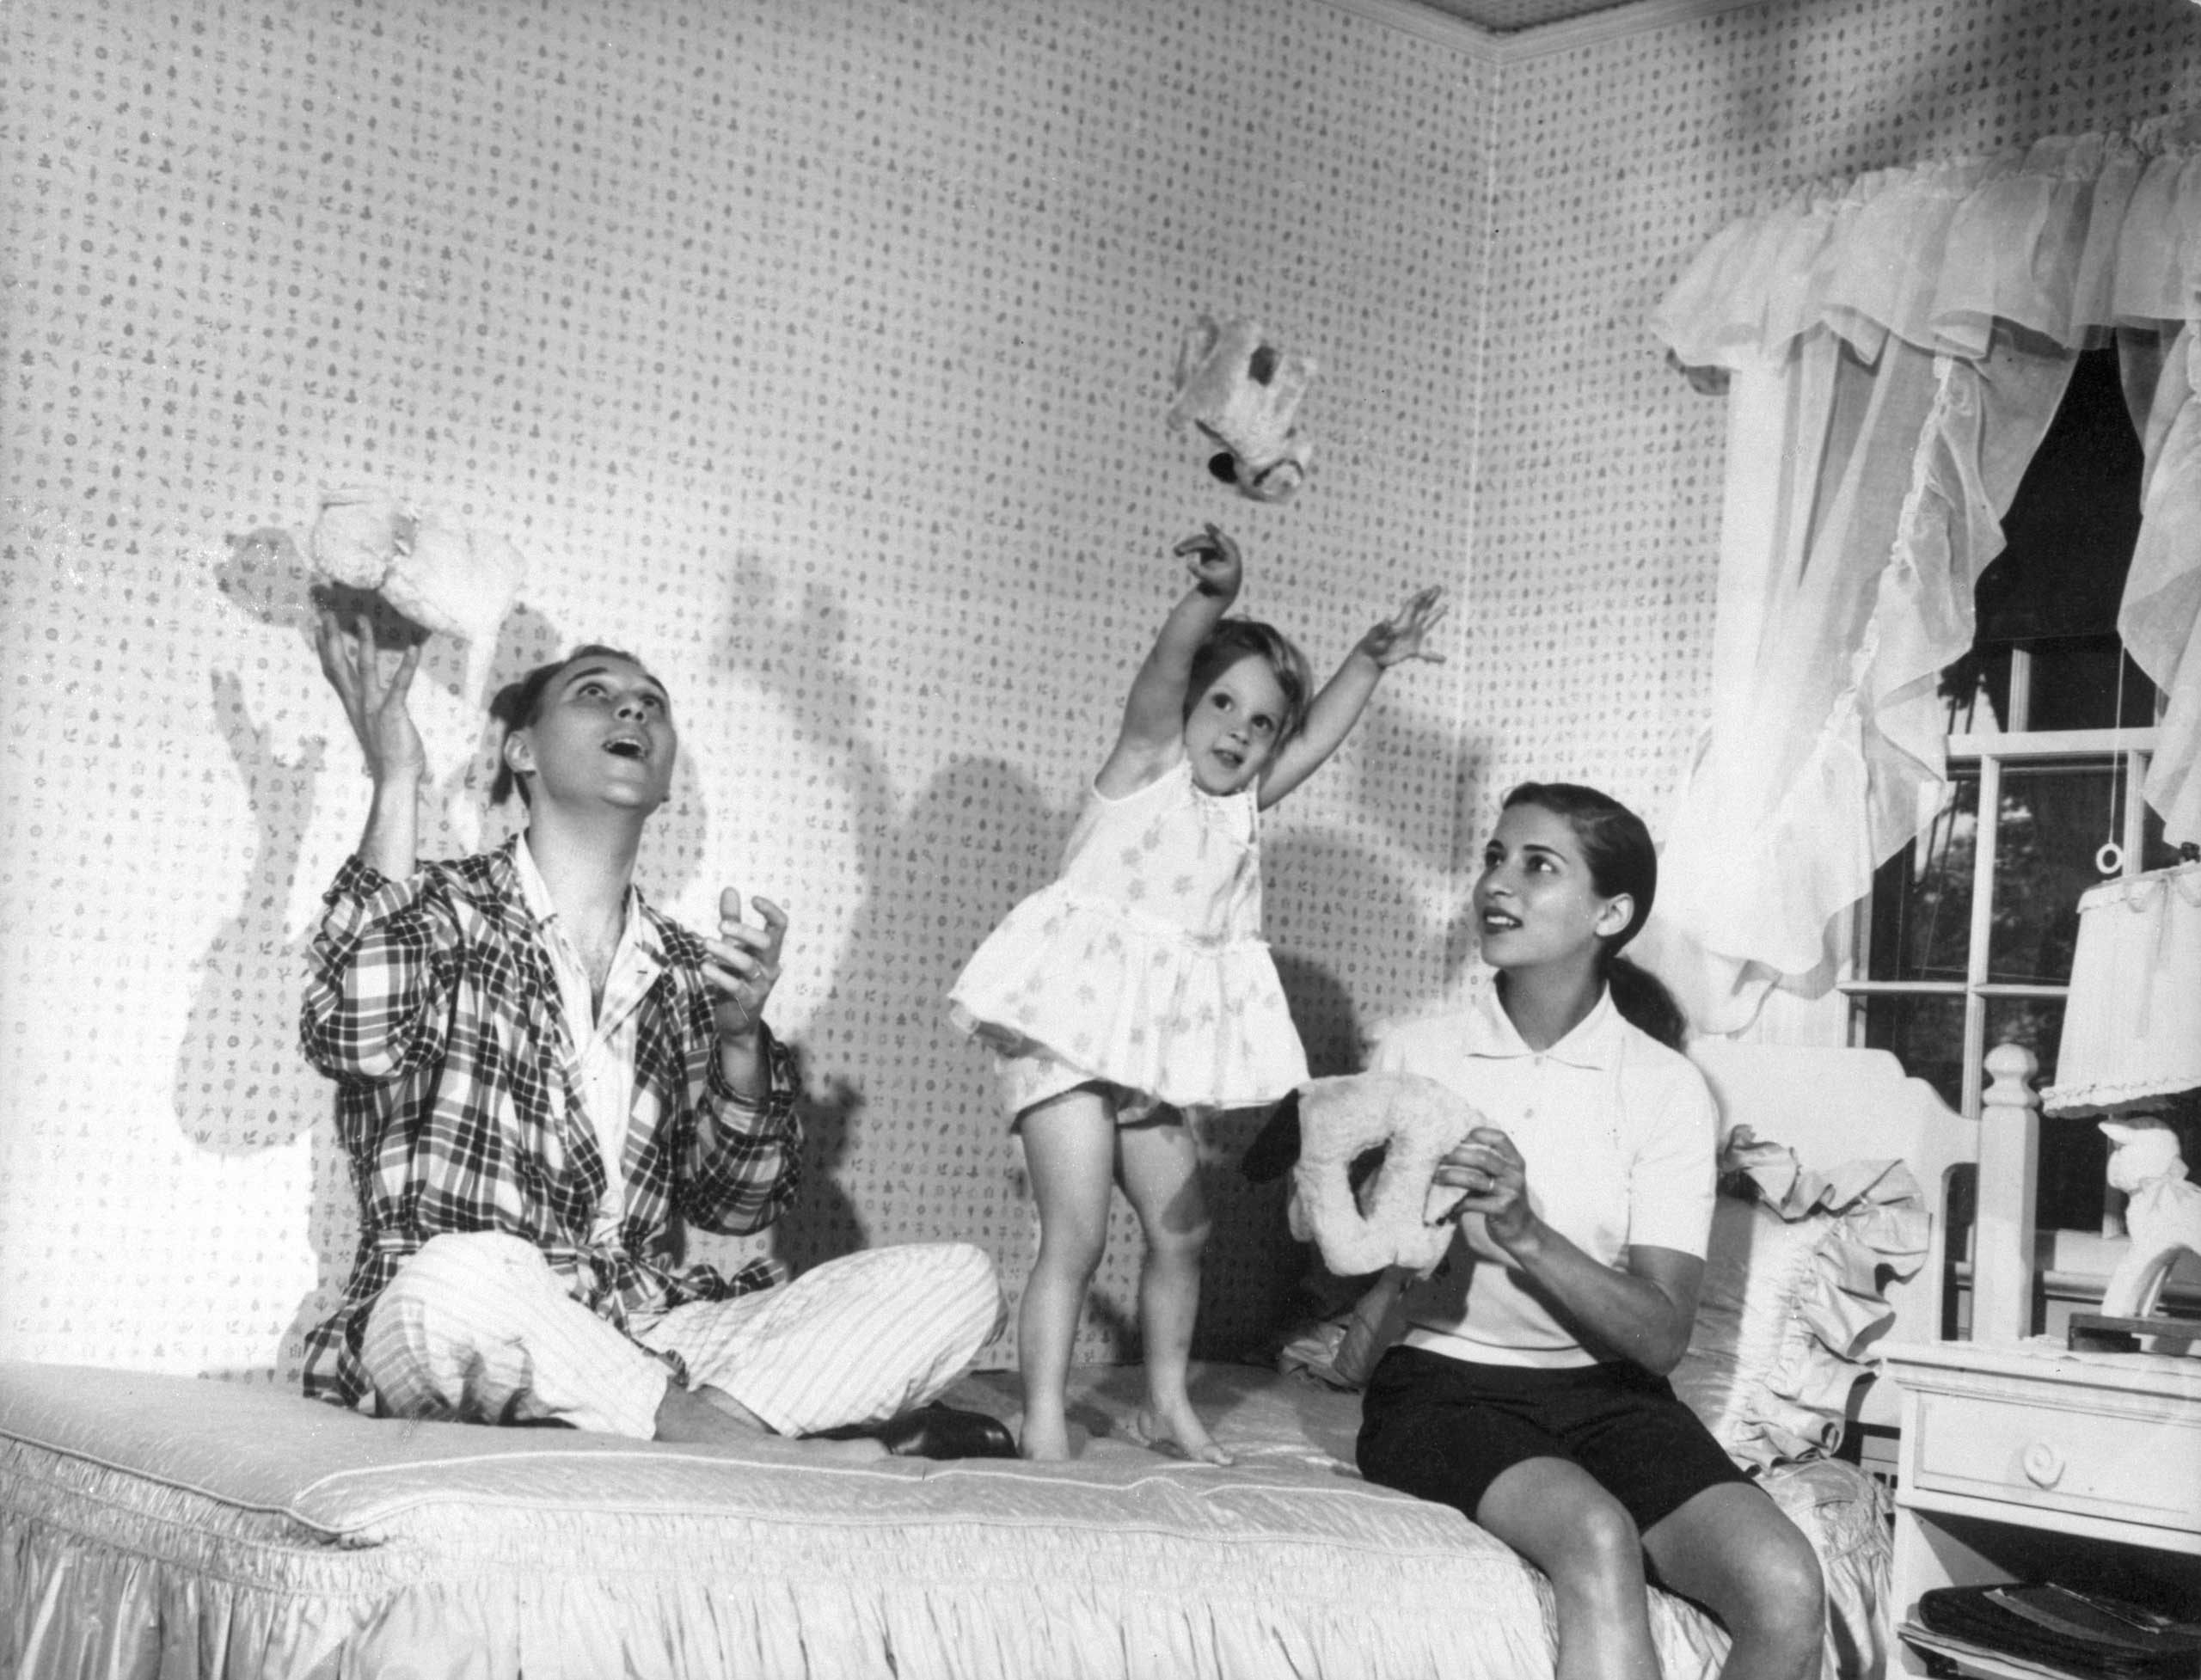 <b>Summer 1958</b> Ruth Bader Ginsburg and Martin Ginsburg play with their three-year old daughter, Jane, in her bedroom at Martin's parents' home in Rockville Centre, N.Y (Collection of the Supreme Court of the United States)